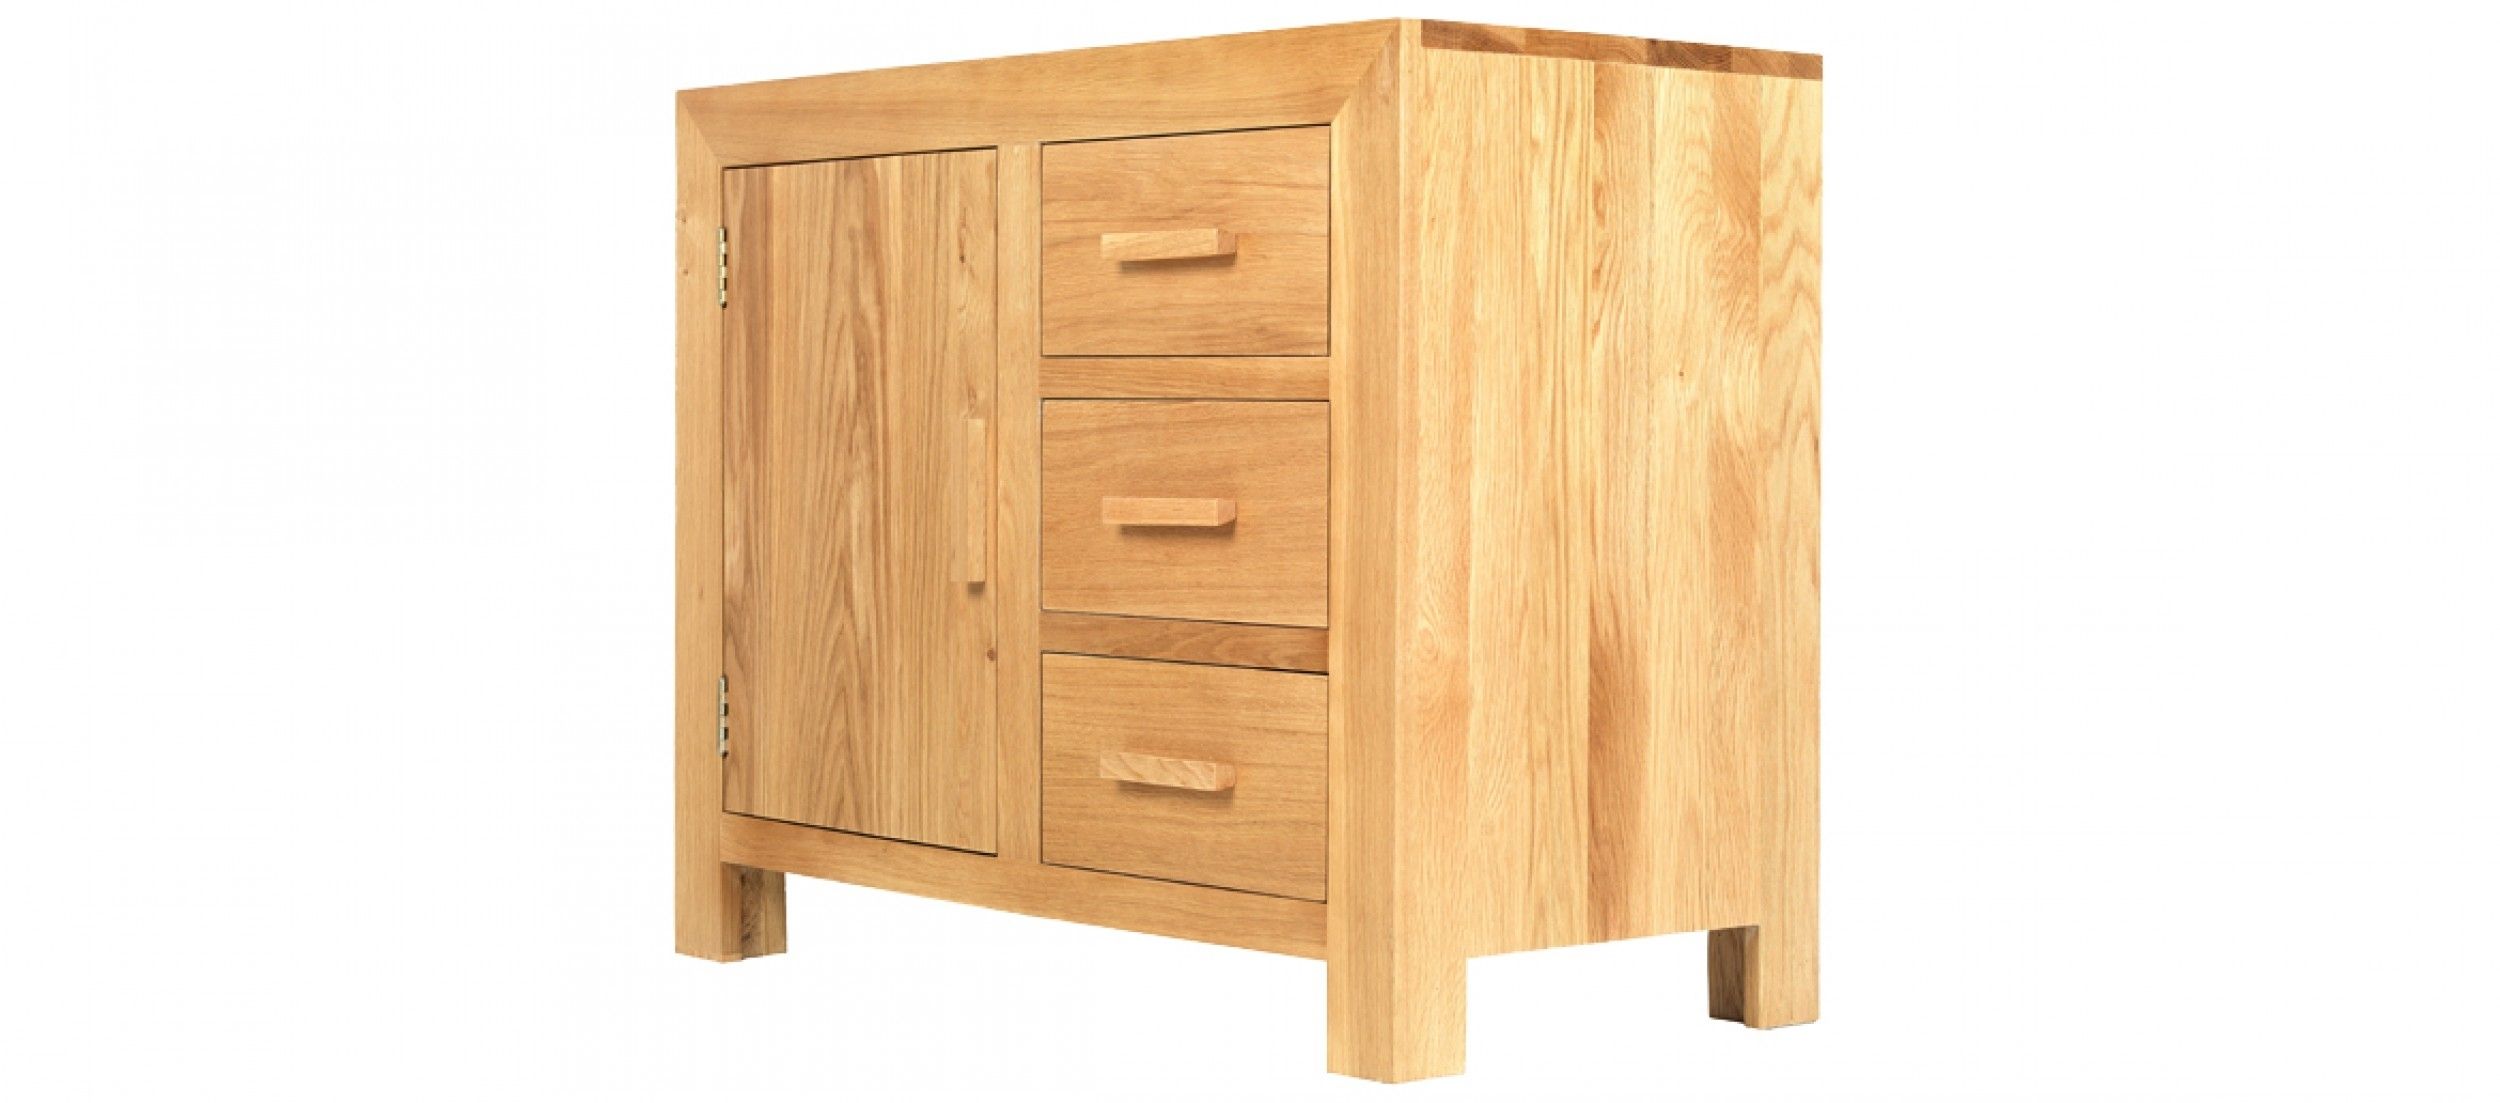 Cube Oak Small Sideboard | Quercus Living Throughout 4 Door/4 Drawer Cast Jali Sideboards (View 19 of 30)